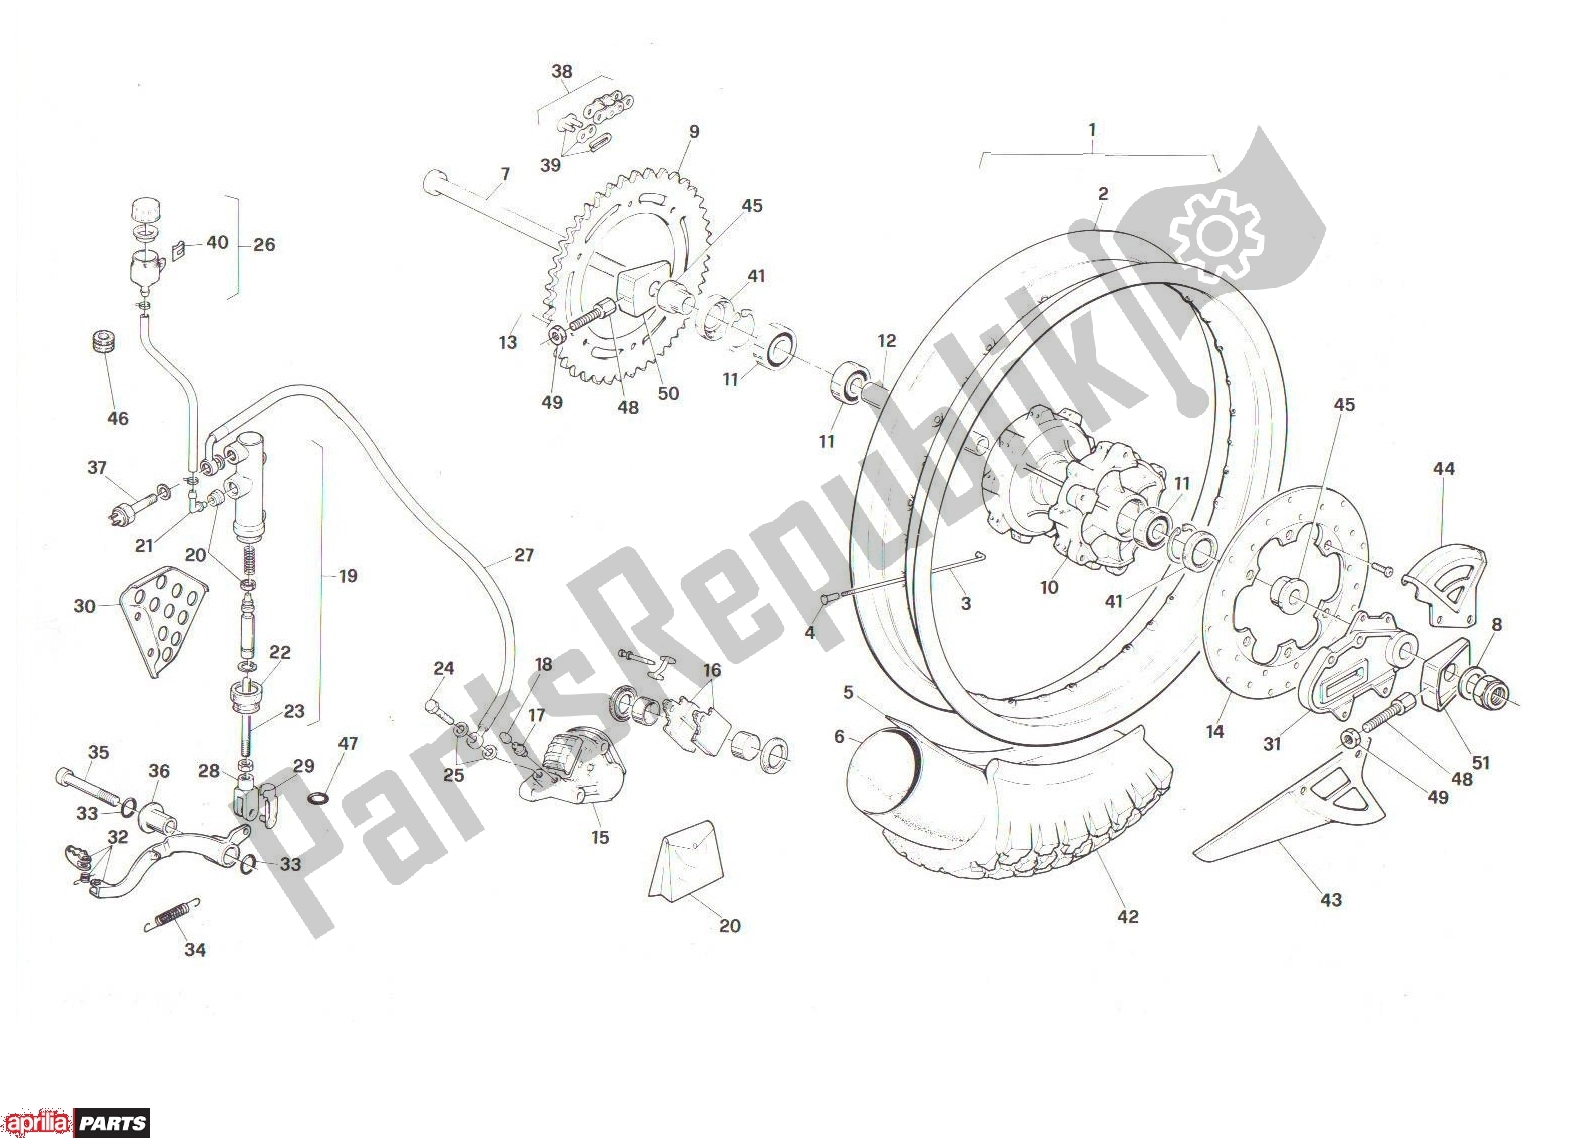 All parts for the Rear Wheel of the Aprilia RX 104 125 1991